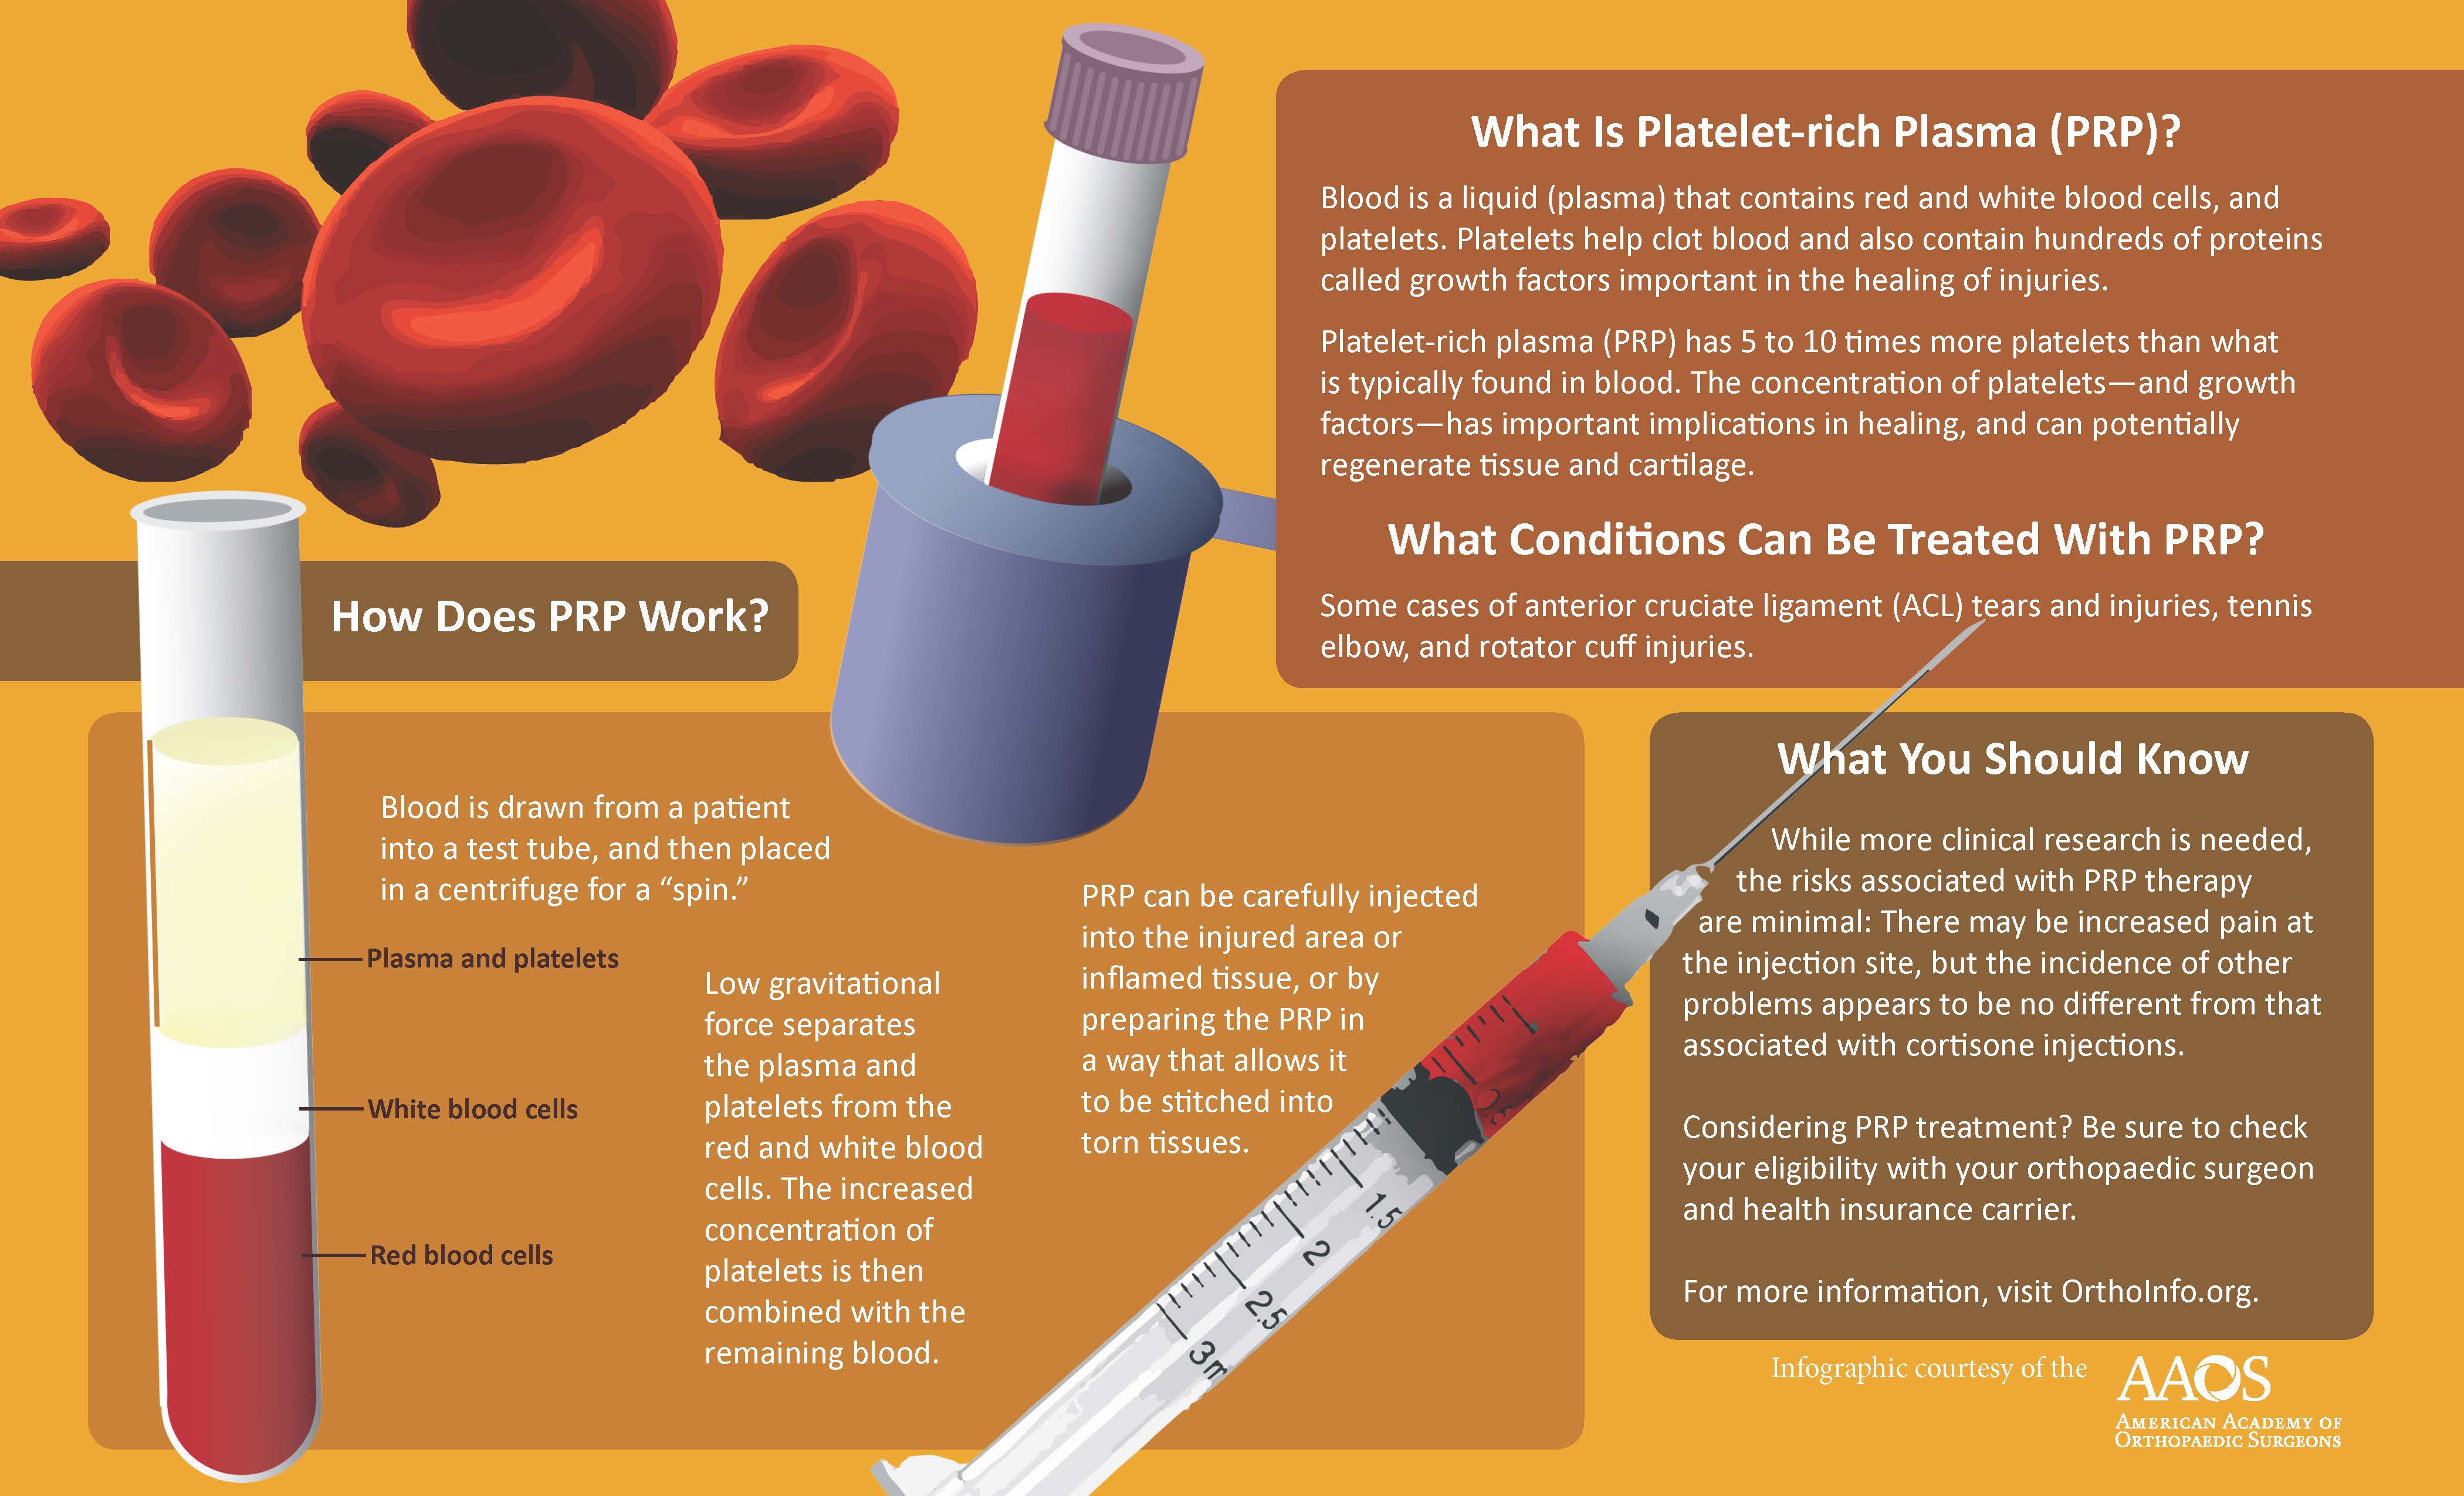 What is PRP Injection For Injury?